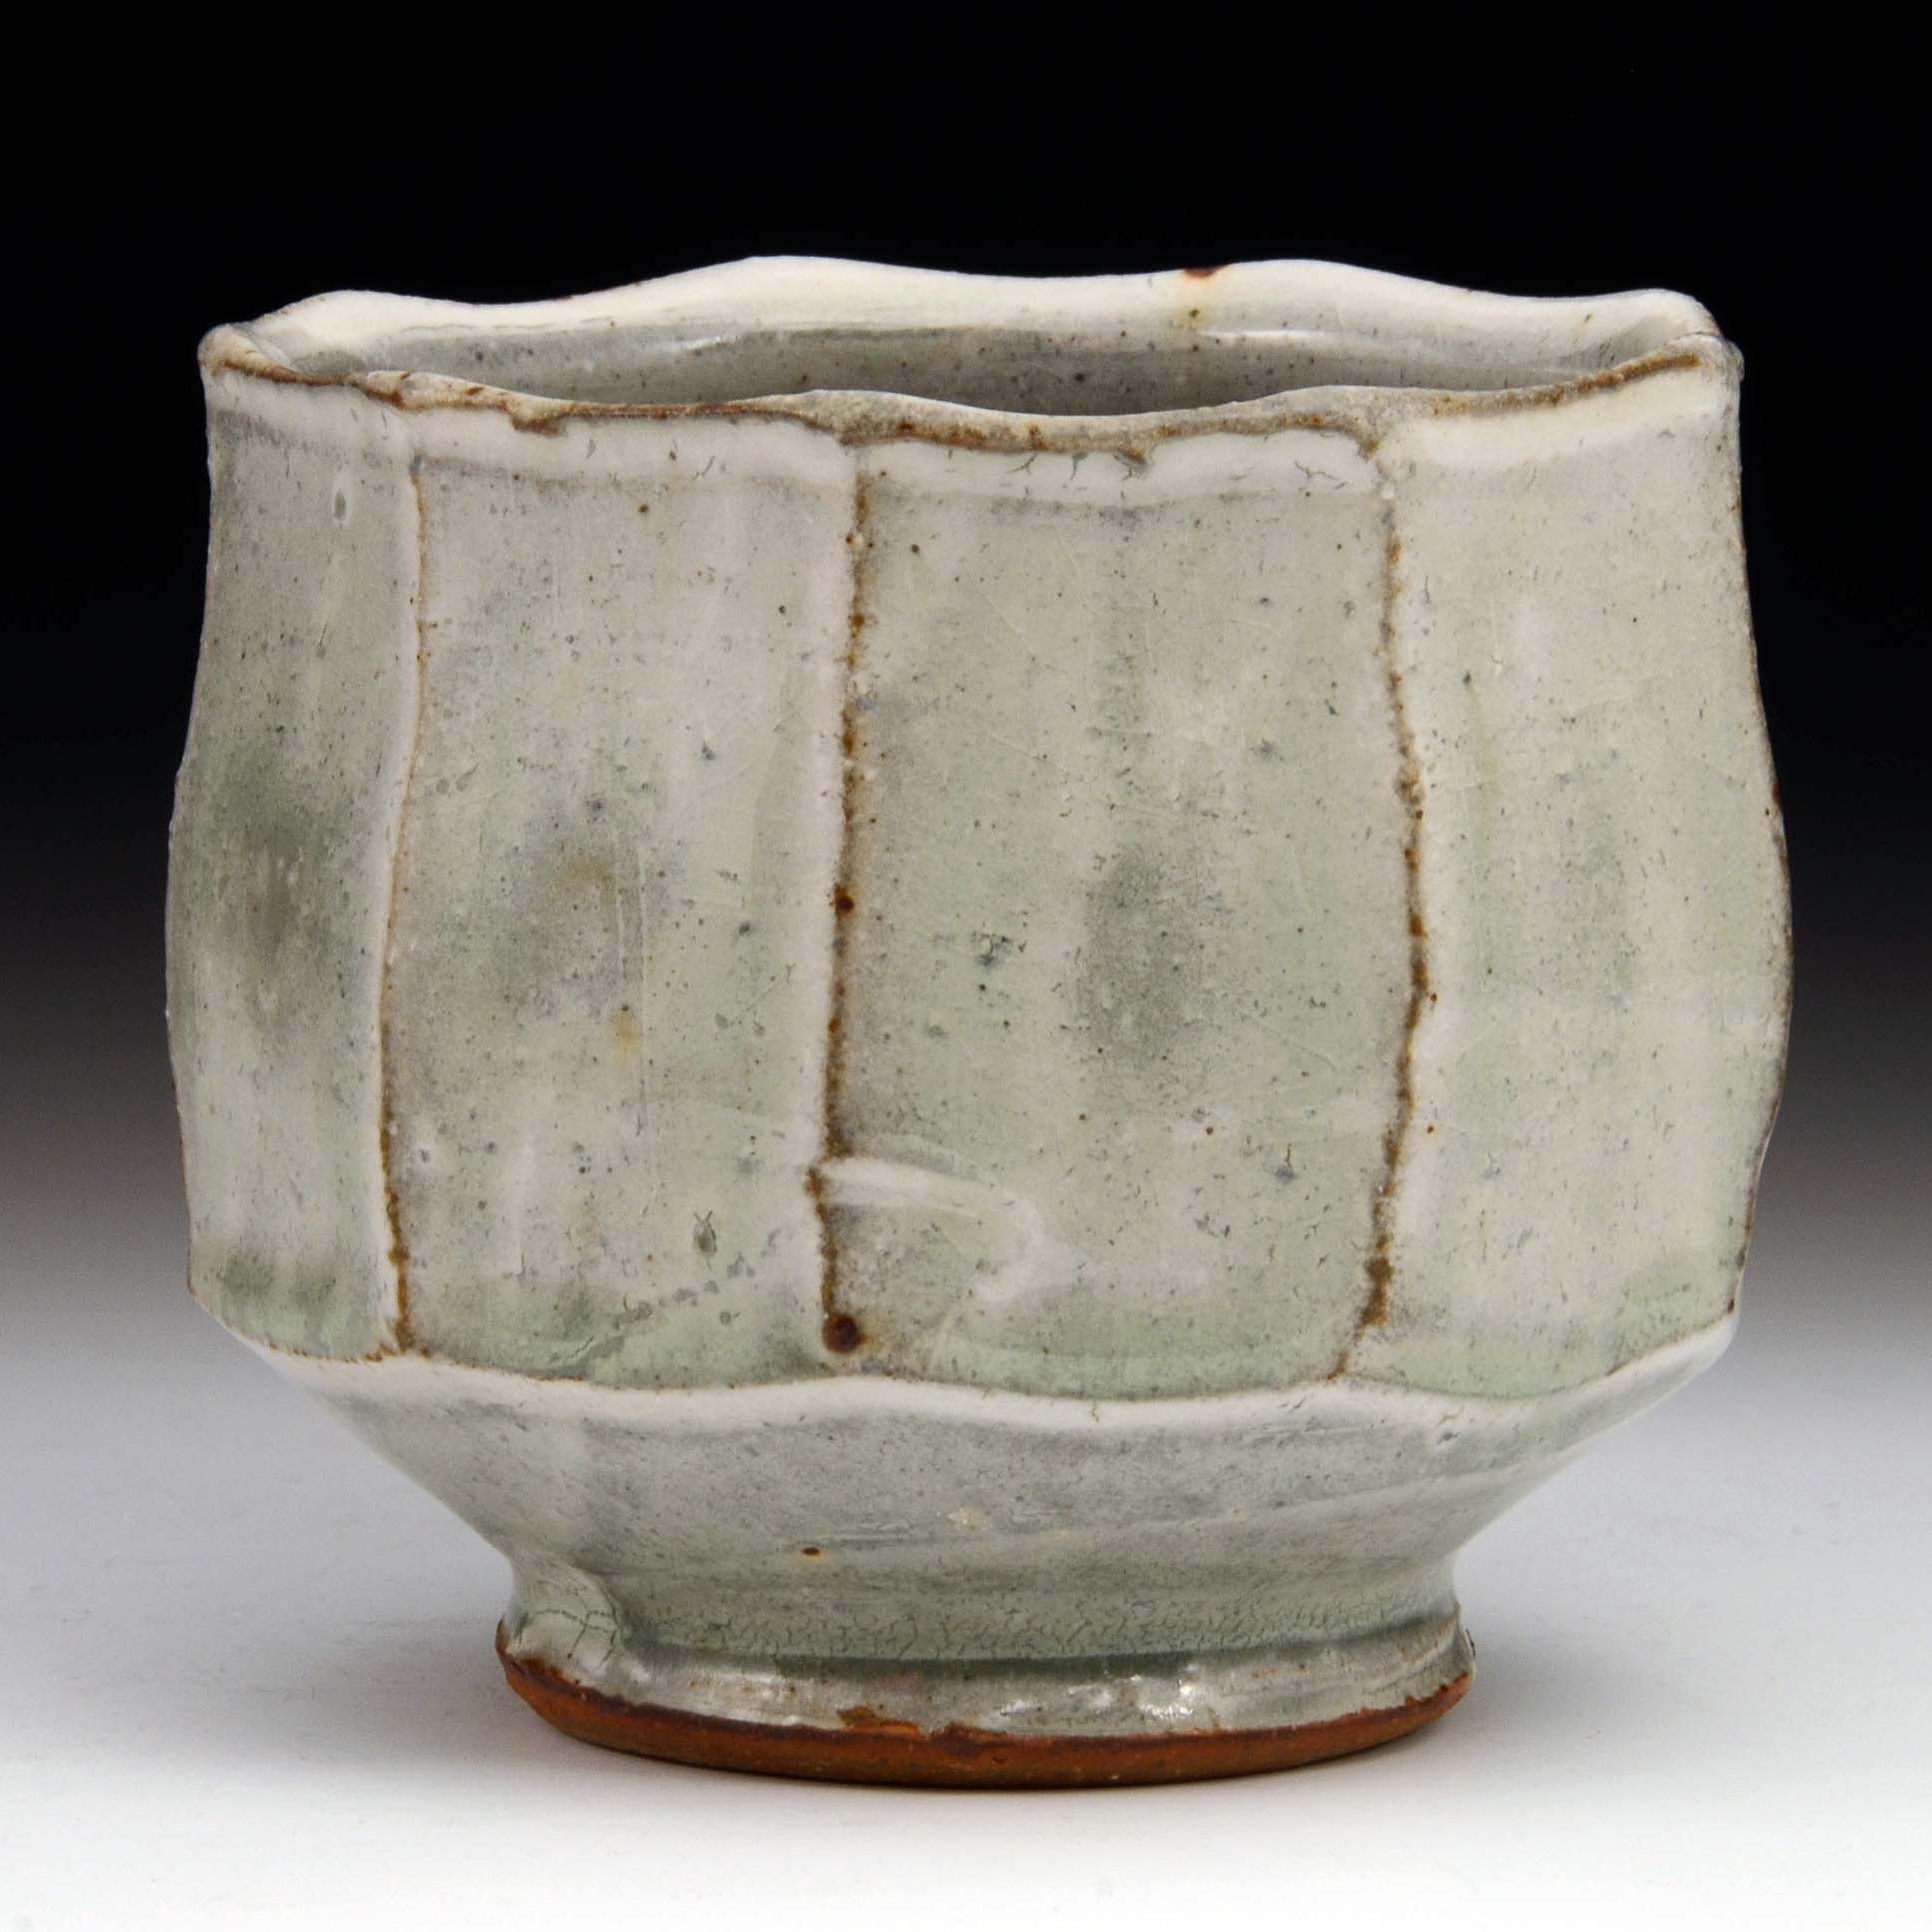 [2]
Rick Hintze, Yunomi, 2020, stoneware, white crackle slip, and wood ash glaze, 3.5x3.875x3.875 inches, collection of the artist